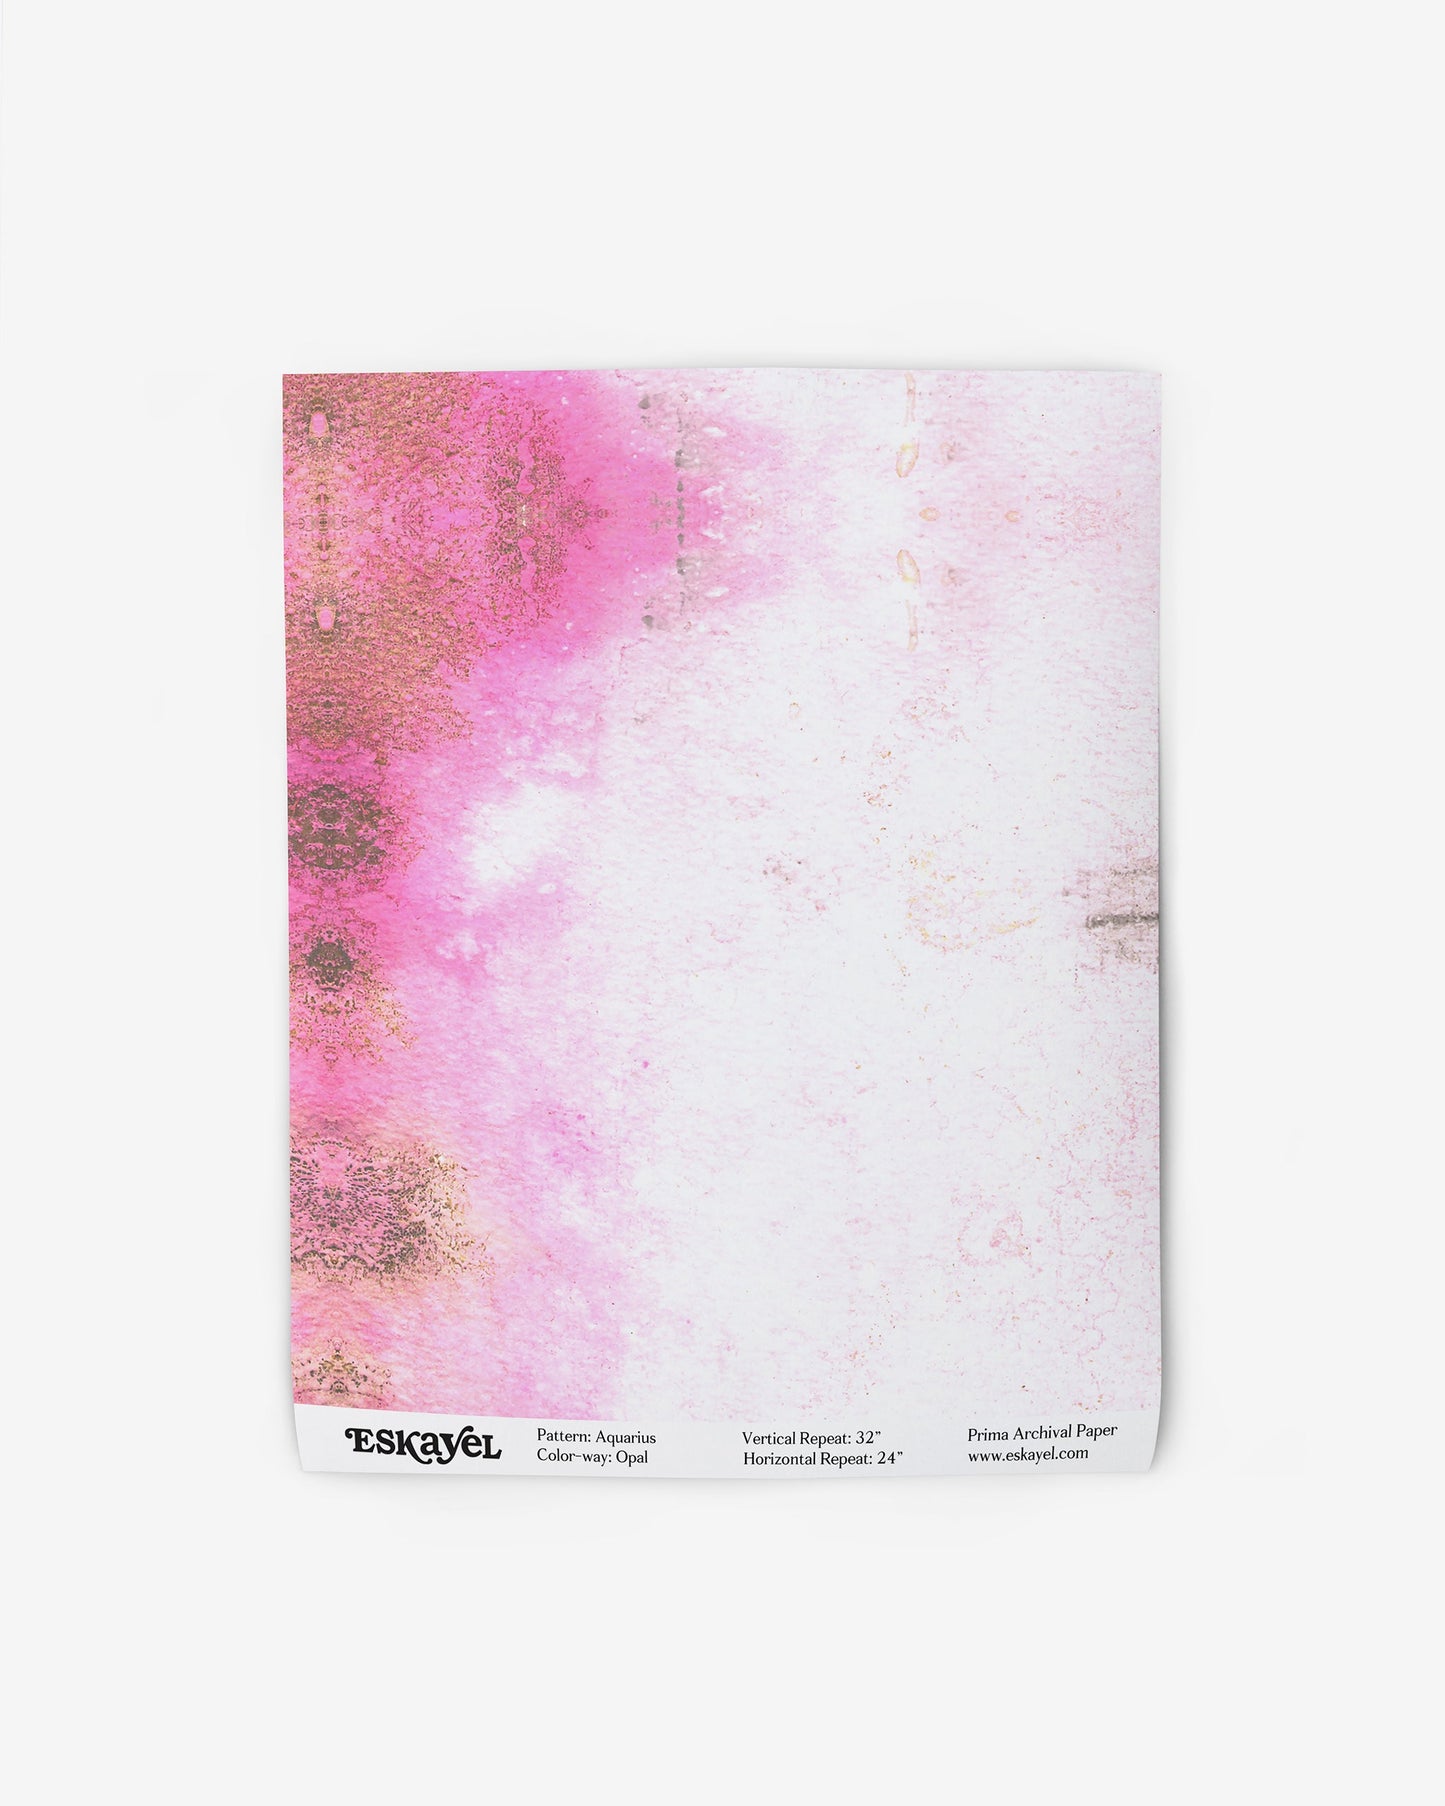 A pink and white paper napkin on wallpaper, perfect for any Aquarius Wallpaper or Opal-themed eventon wallpaper